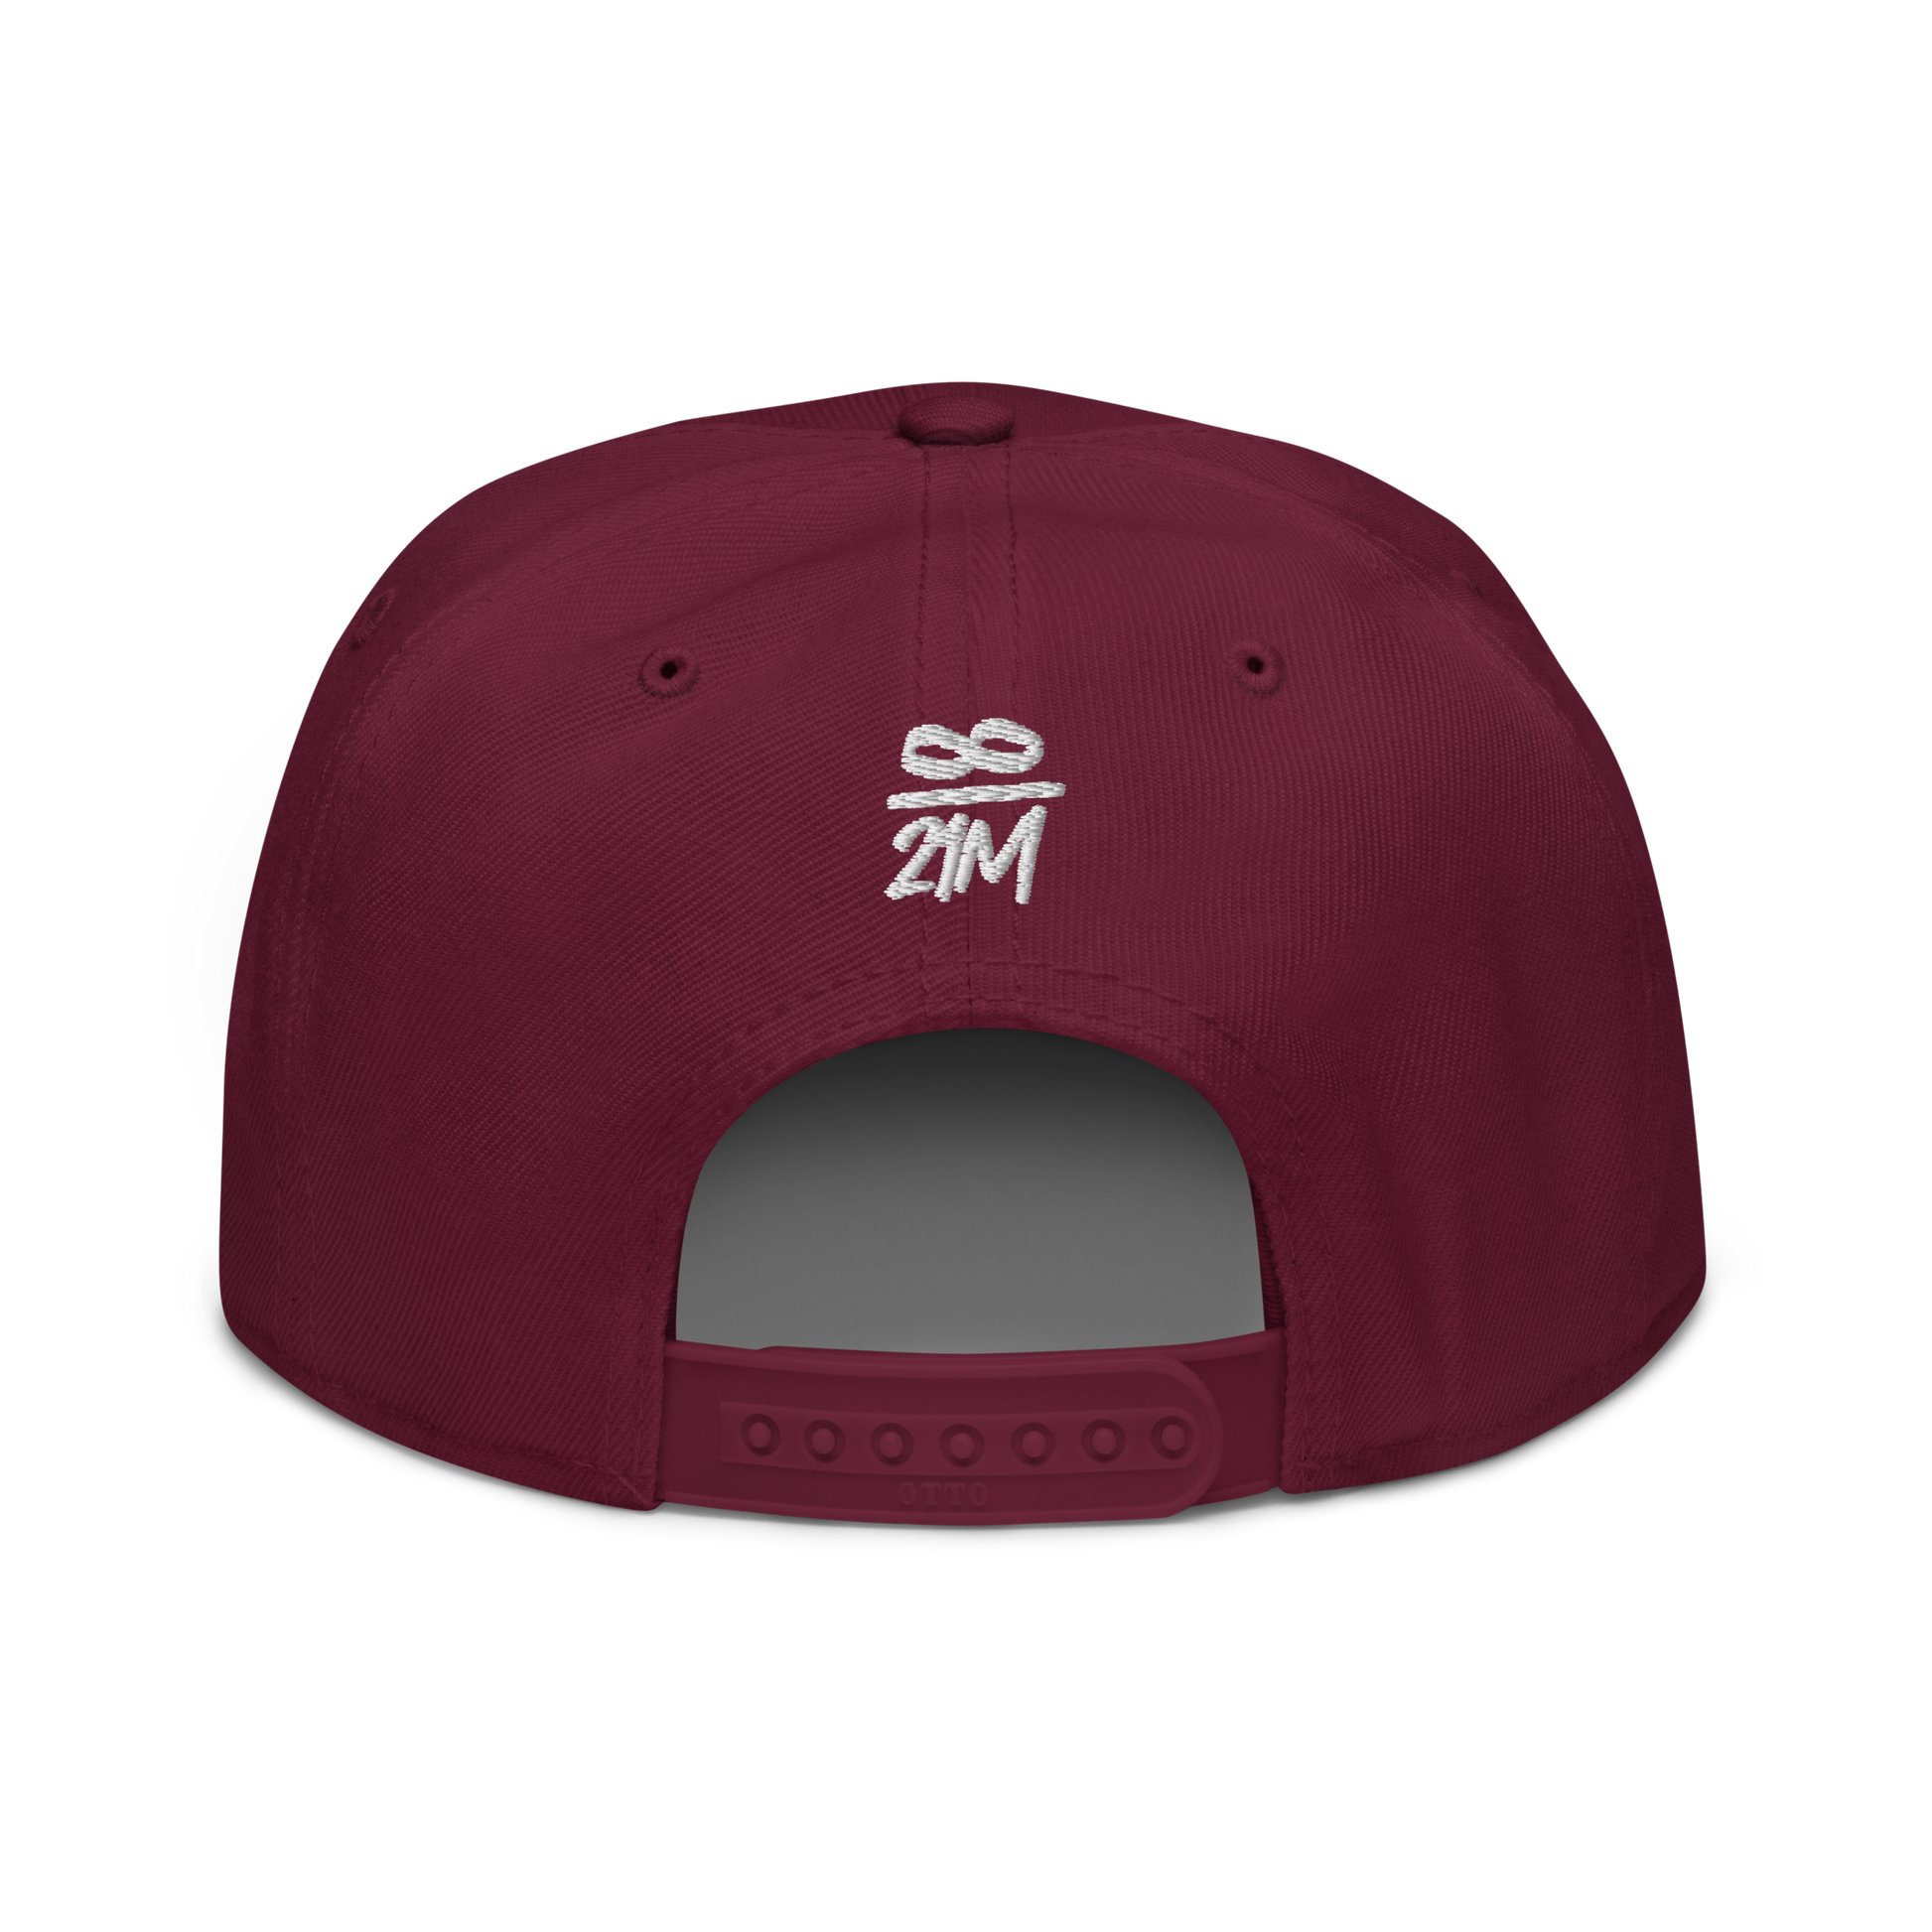 Back view of a burgundy maroon bitcoin snapback hat.